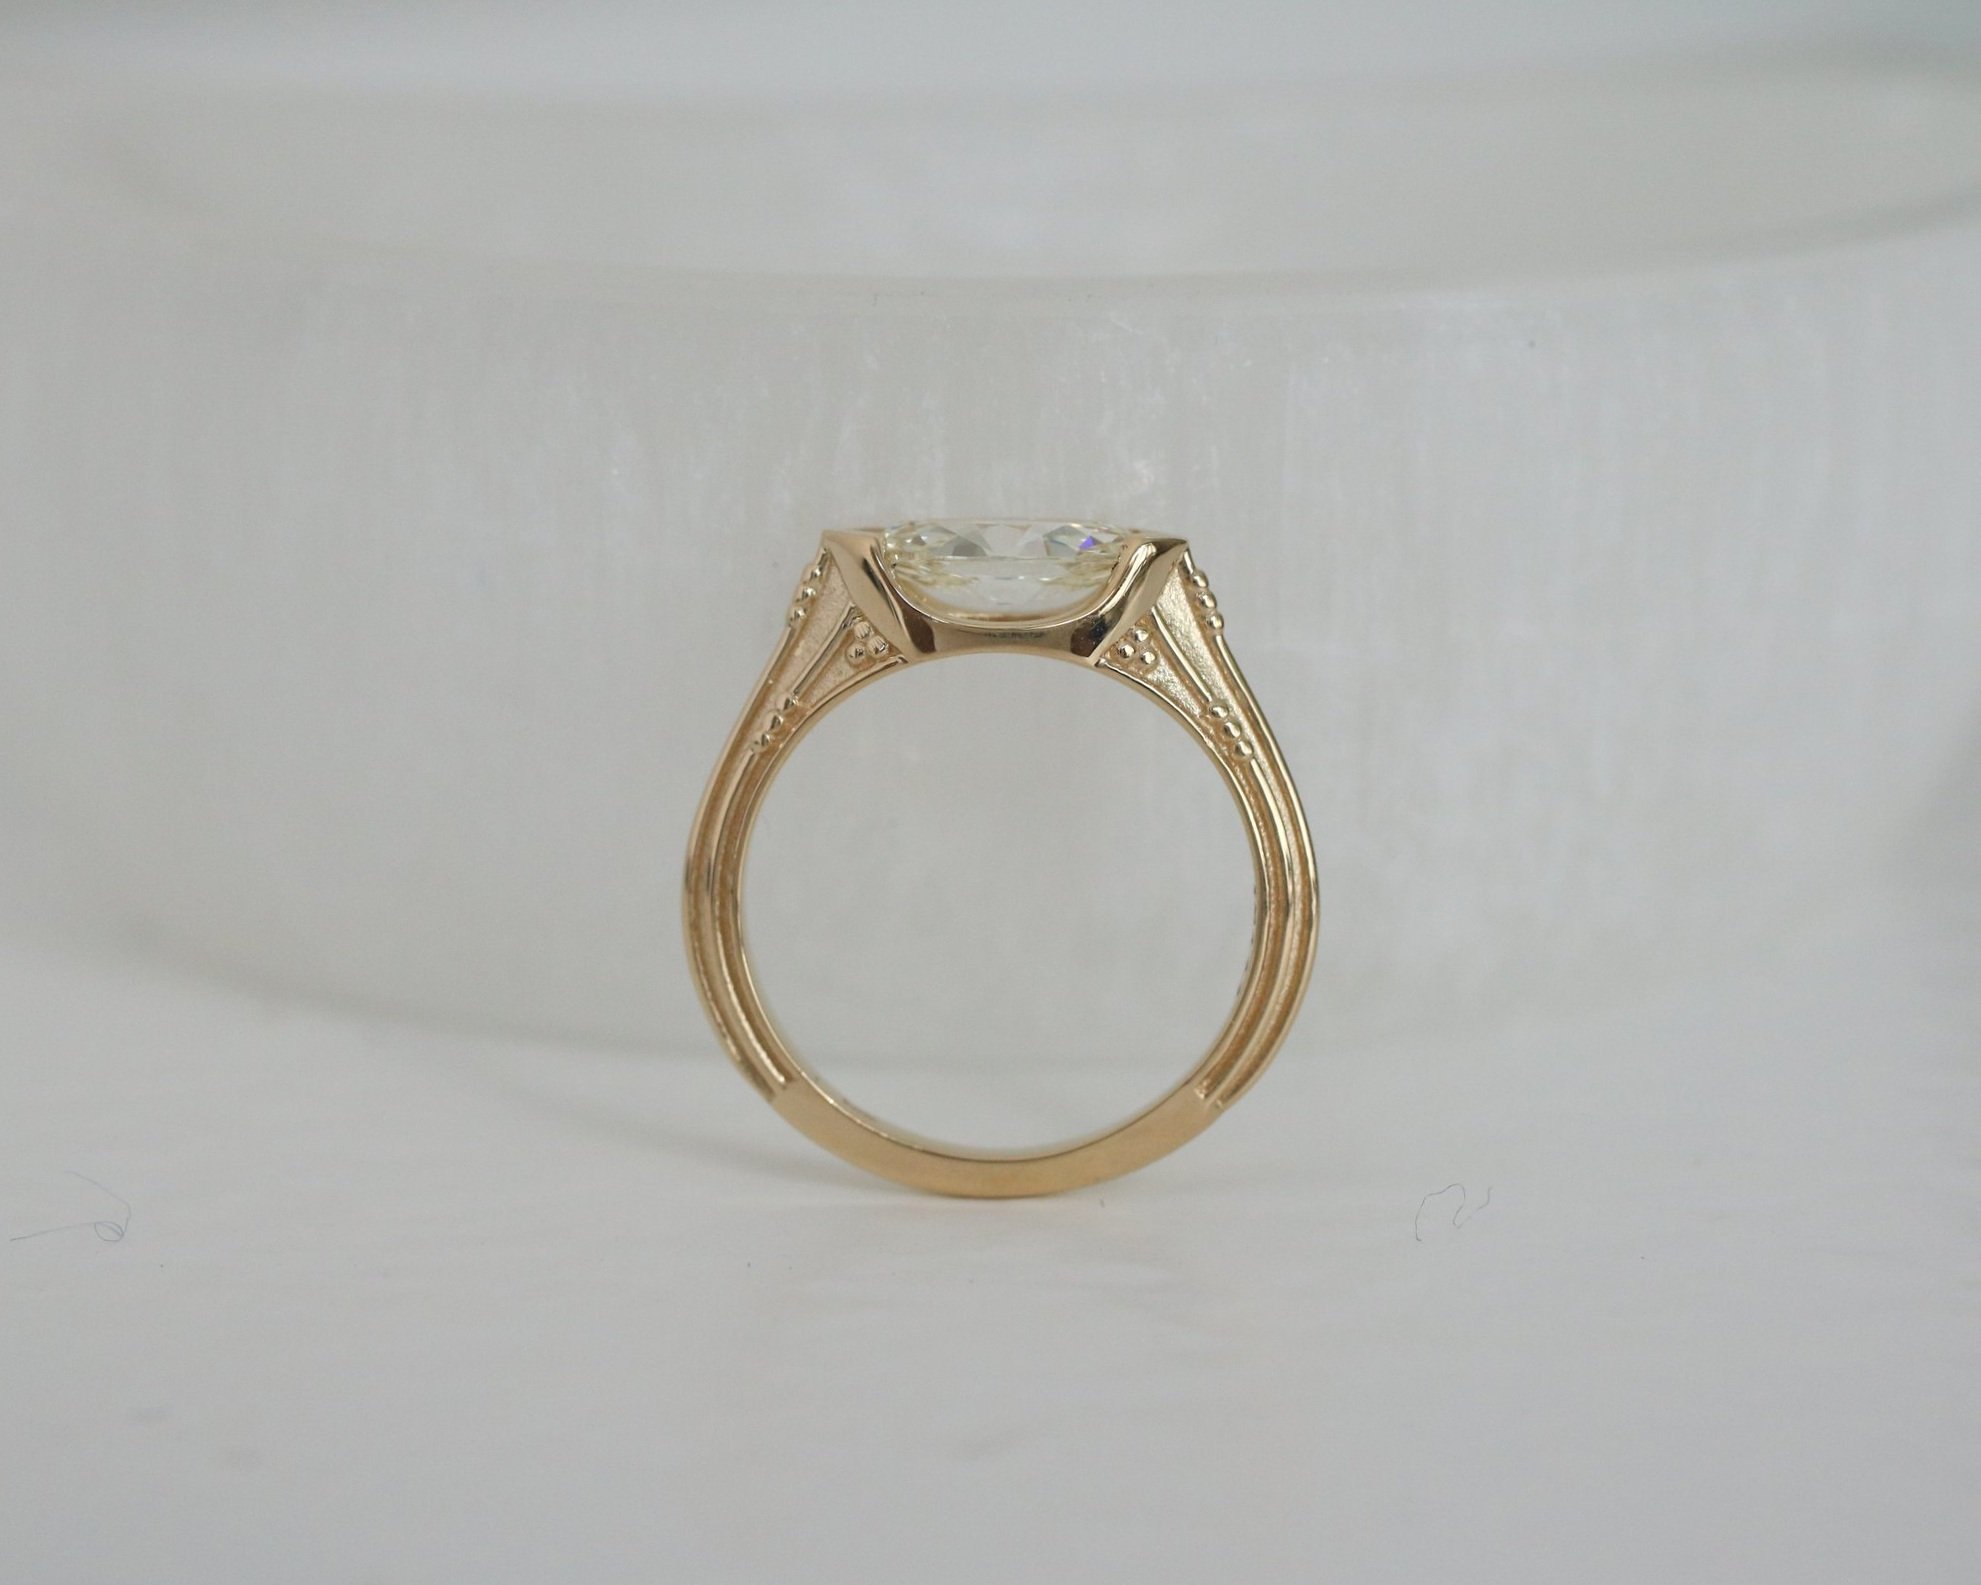 BRITTANY ENGAGEMENT RING - 0.70CT NATURAL MOVAL DIAMOND + 14K YELLOW GOLD